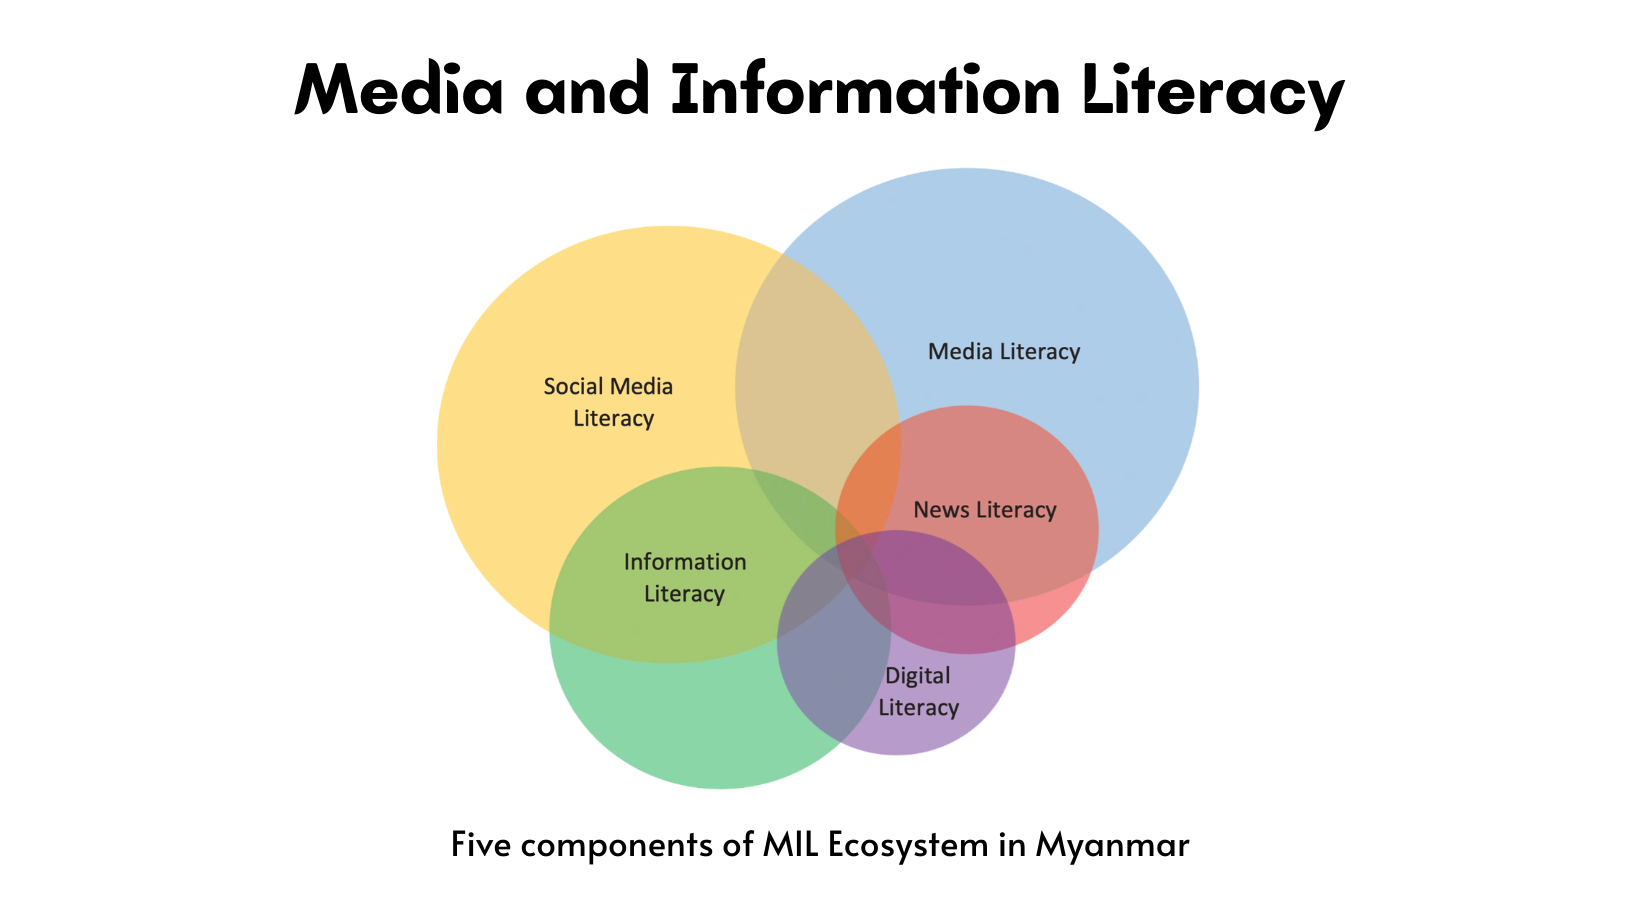 Media
and Information Literacy (with focus on Digital Literacy)